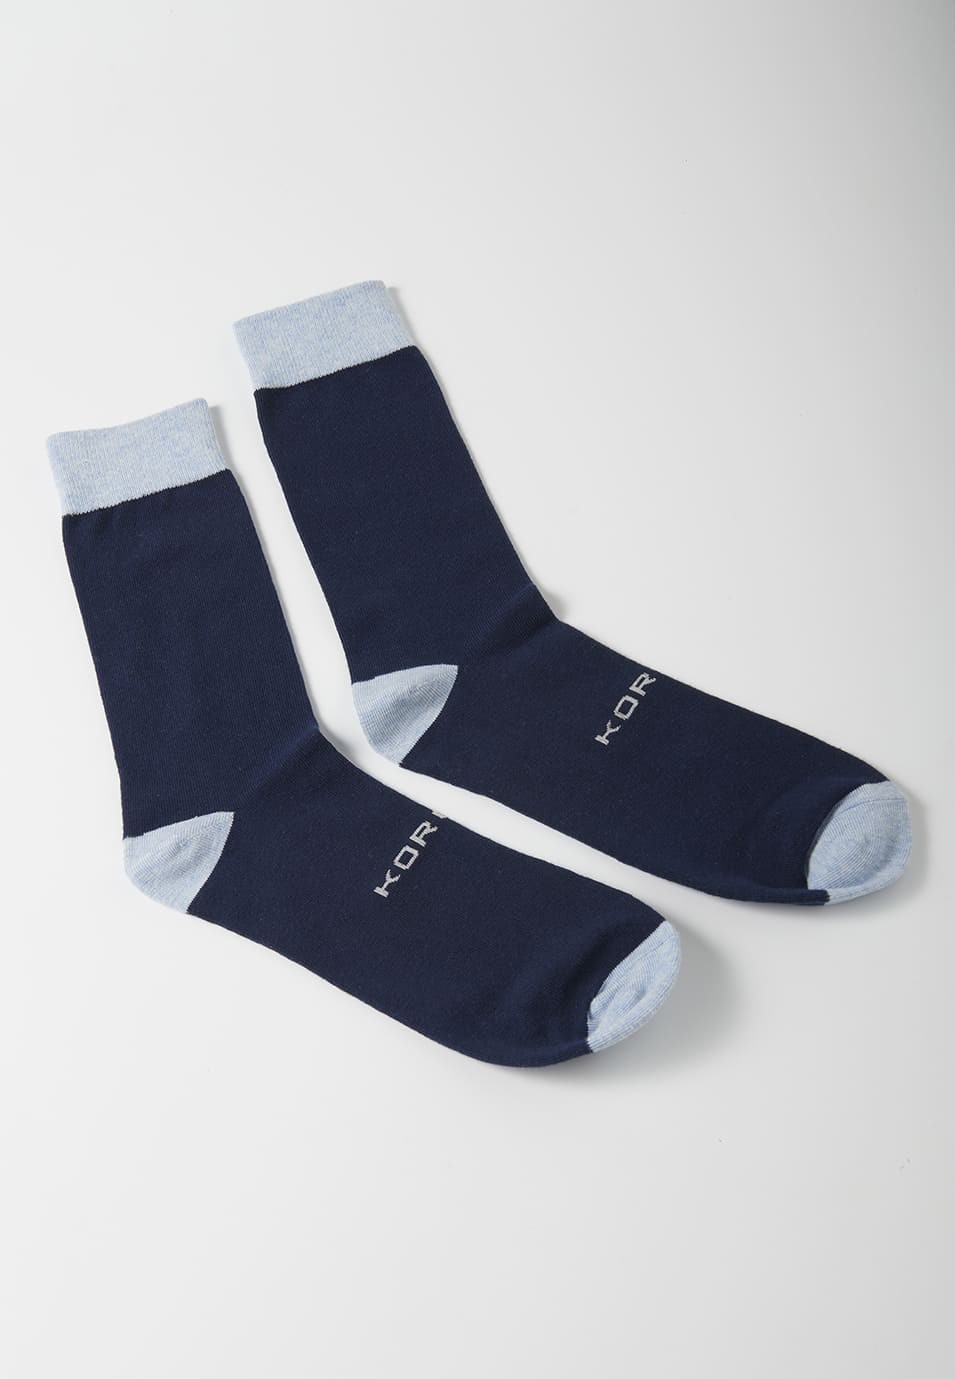 Pack of 7 socks in different colors over the ankle for Men